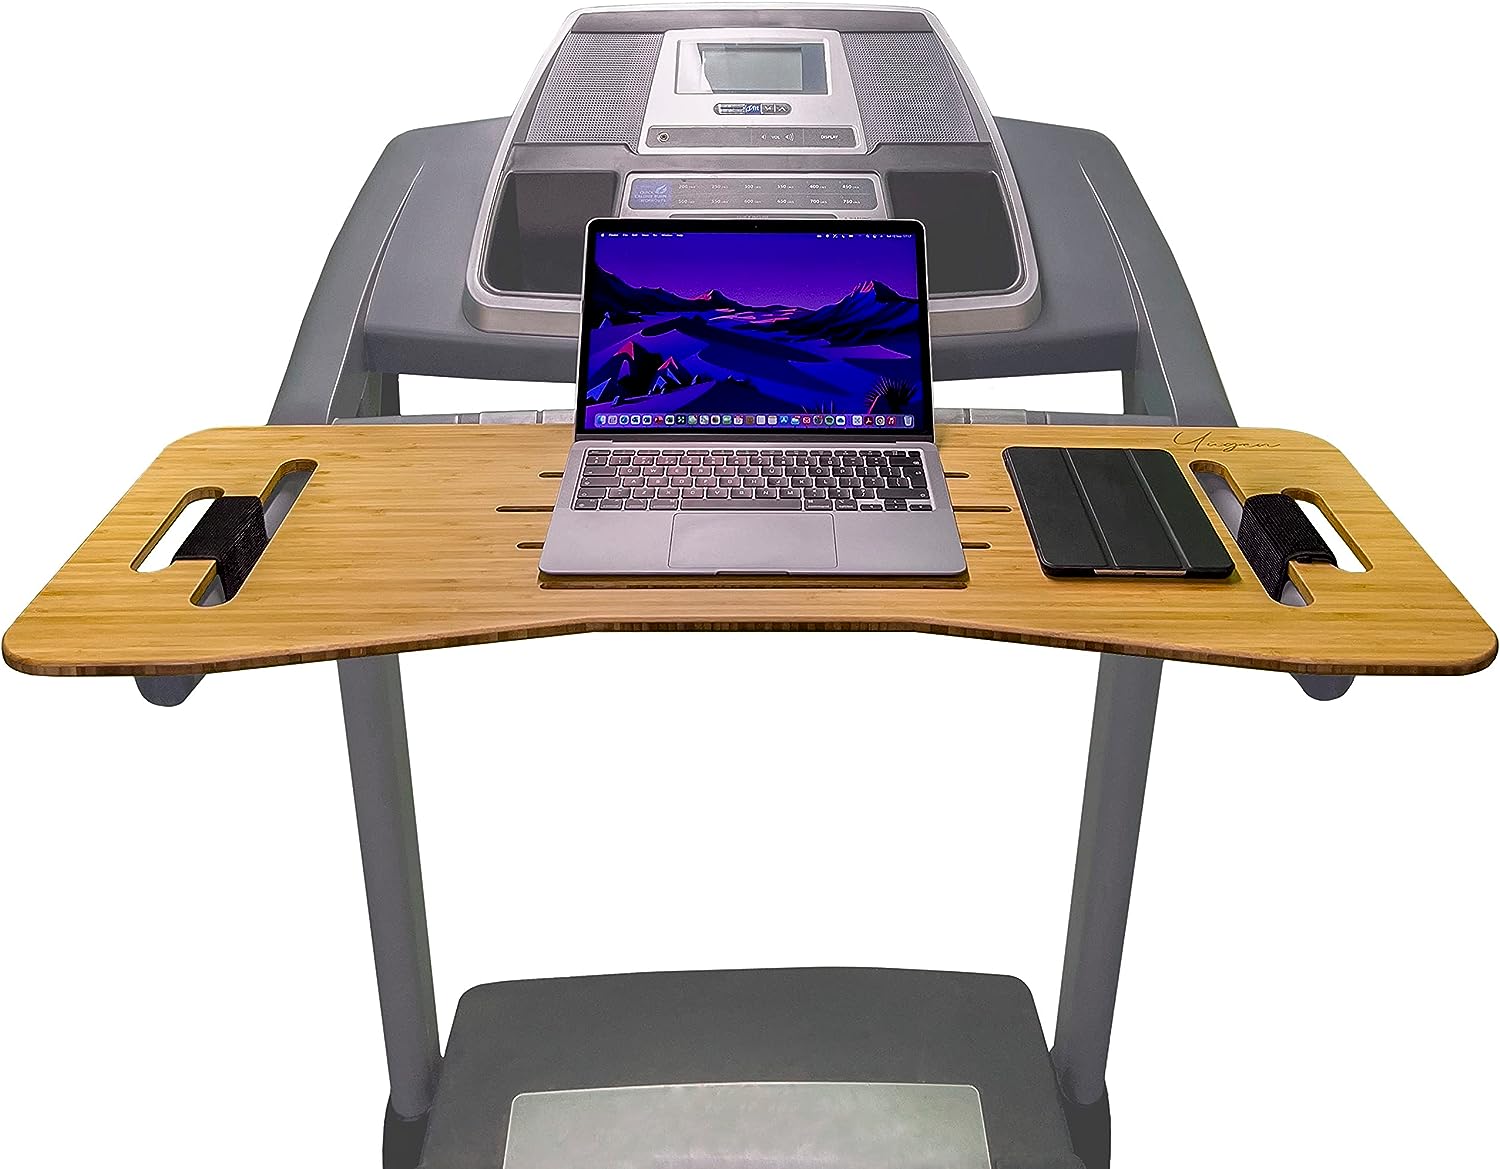 Yūgen Bamboo Treadmill Desk Attachment - Universal Fit Up to 40 Laptop Stand for Treadmill - Ergonomic Adjustable High Ventilation Treadmill Desk for Laptop, Notebook, iPad, Smart Device, Book Holder